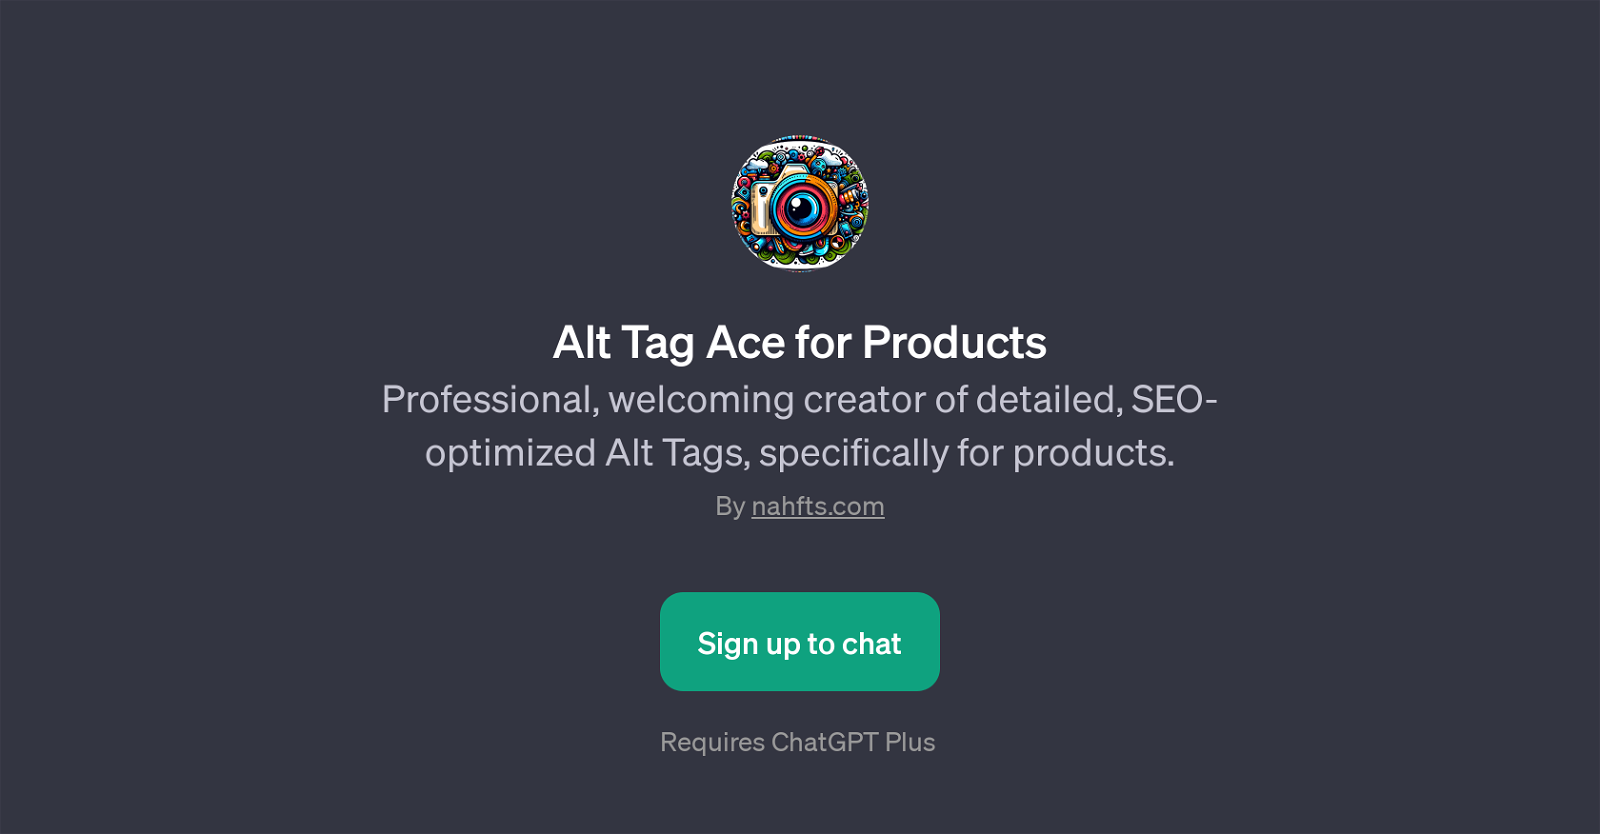 Alt Tag Ace for Products website